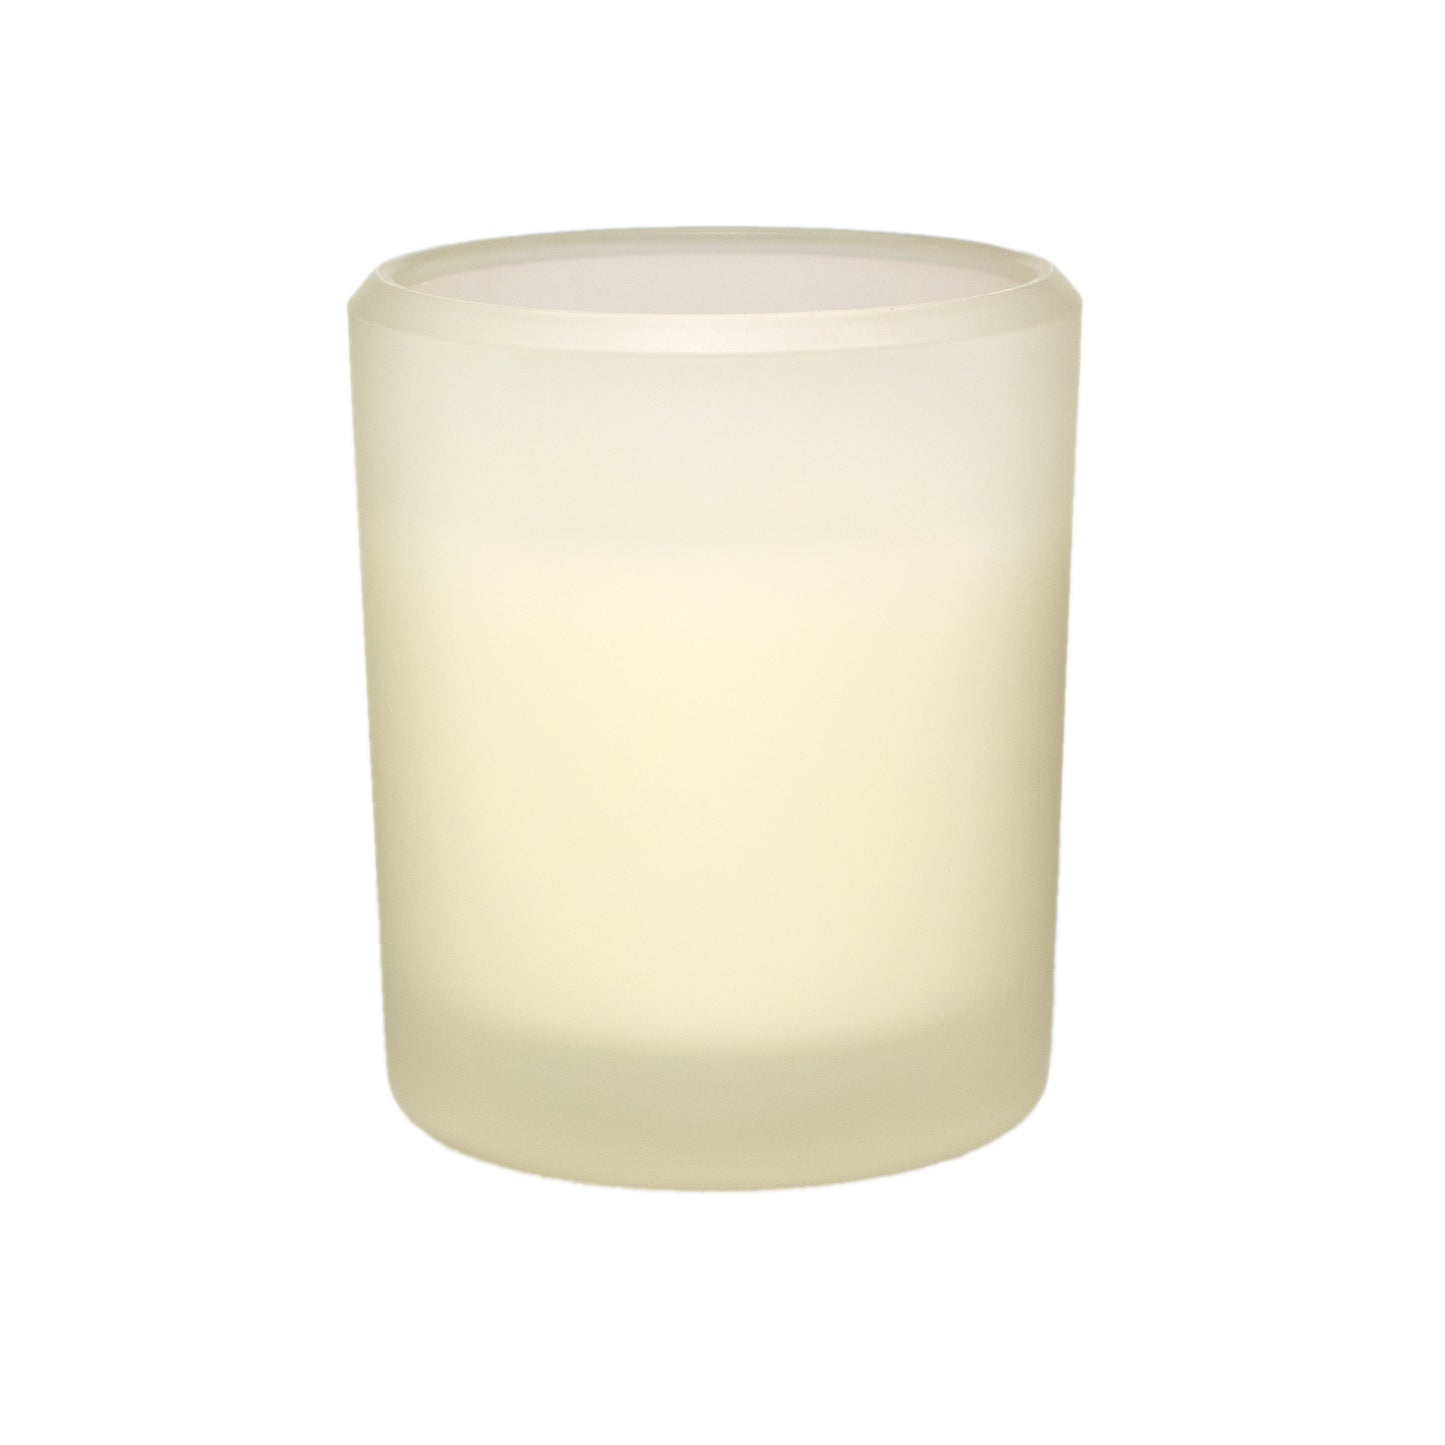 Pier 1 Home Spice 8oz Boxed Soy Candle